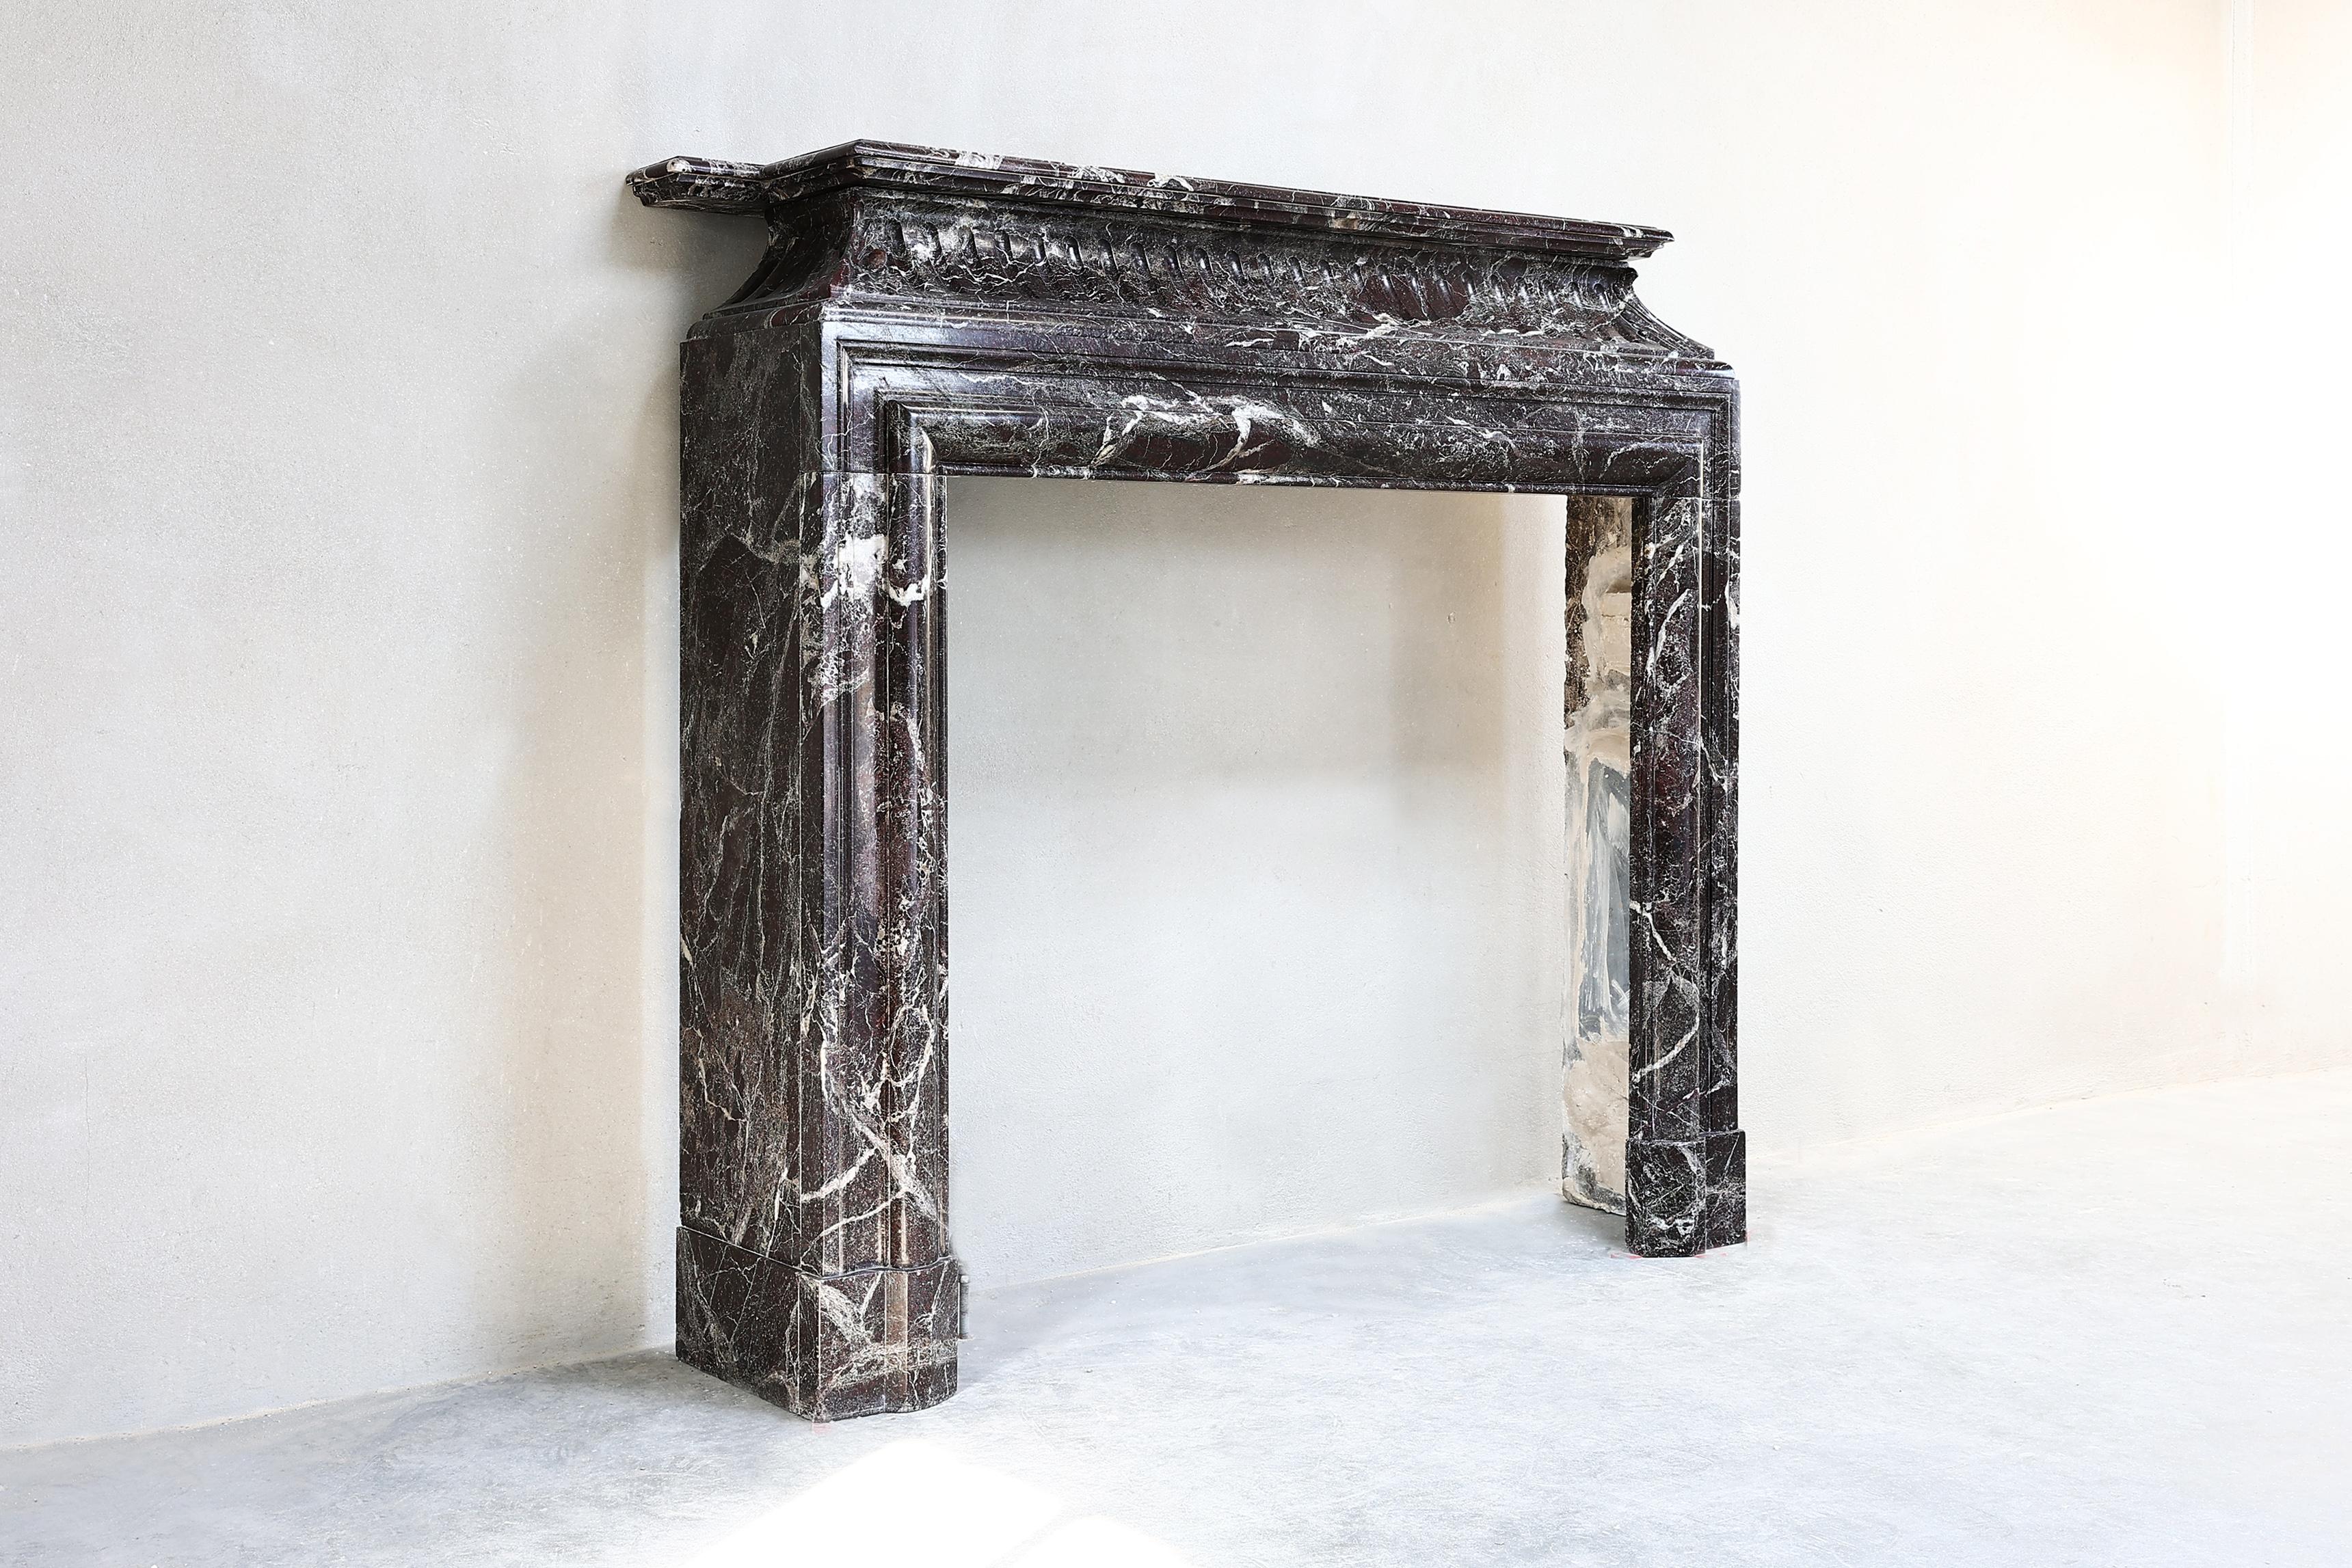 Special antique fireplace of Levanto marble from Italy. This fireplace dates from the 19th century and is in the style of Louis XVI. This fireplace has beautiful flutes in the front part and straight legs. The color of this fireplace gives a warm